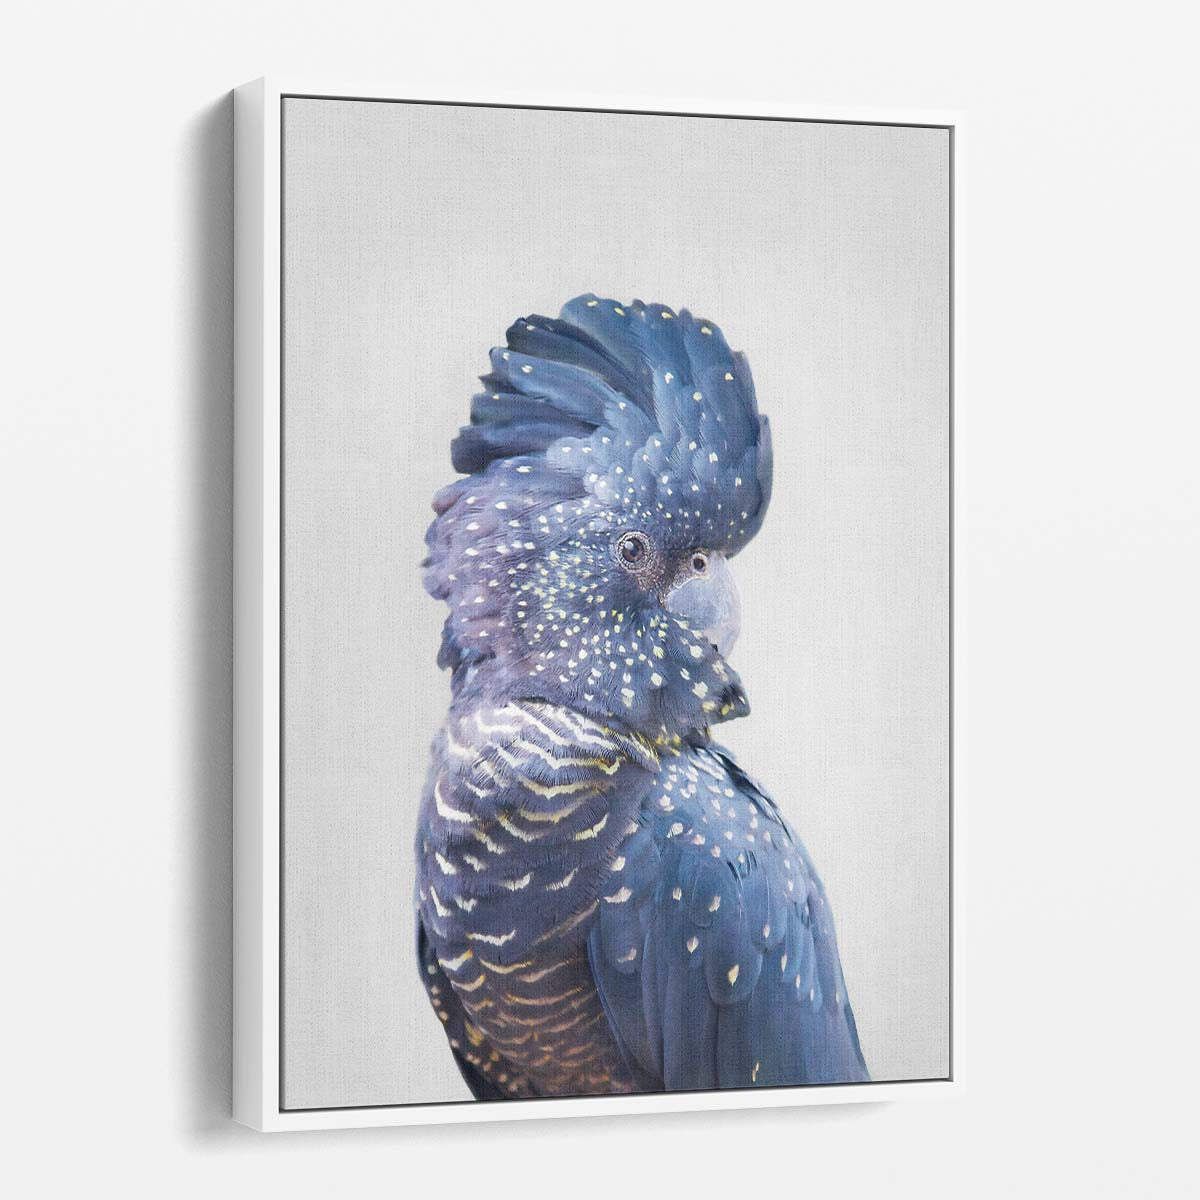 Blue Cockatoo Wildlife Photography Art by Kathrin Pienaar by Luxuriance Designs, made in USA